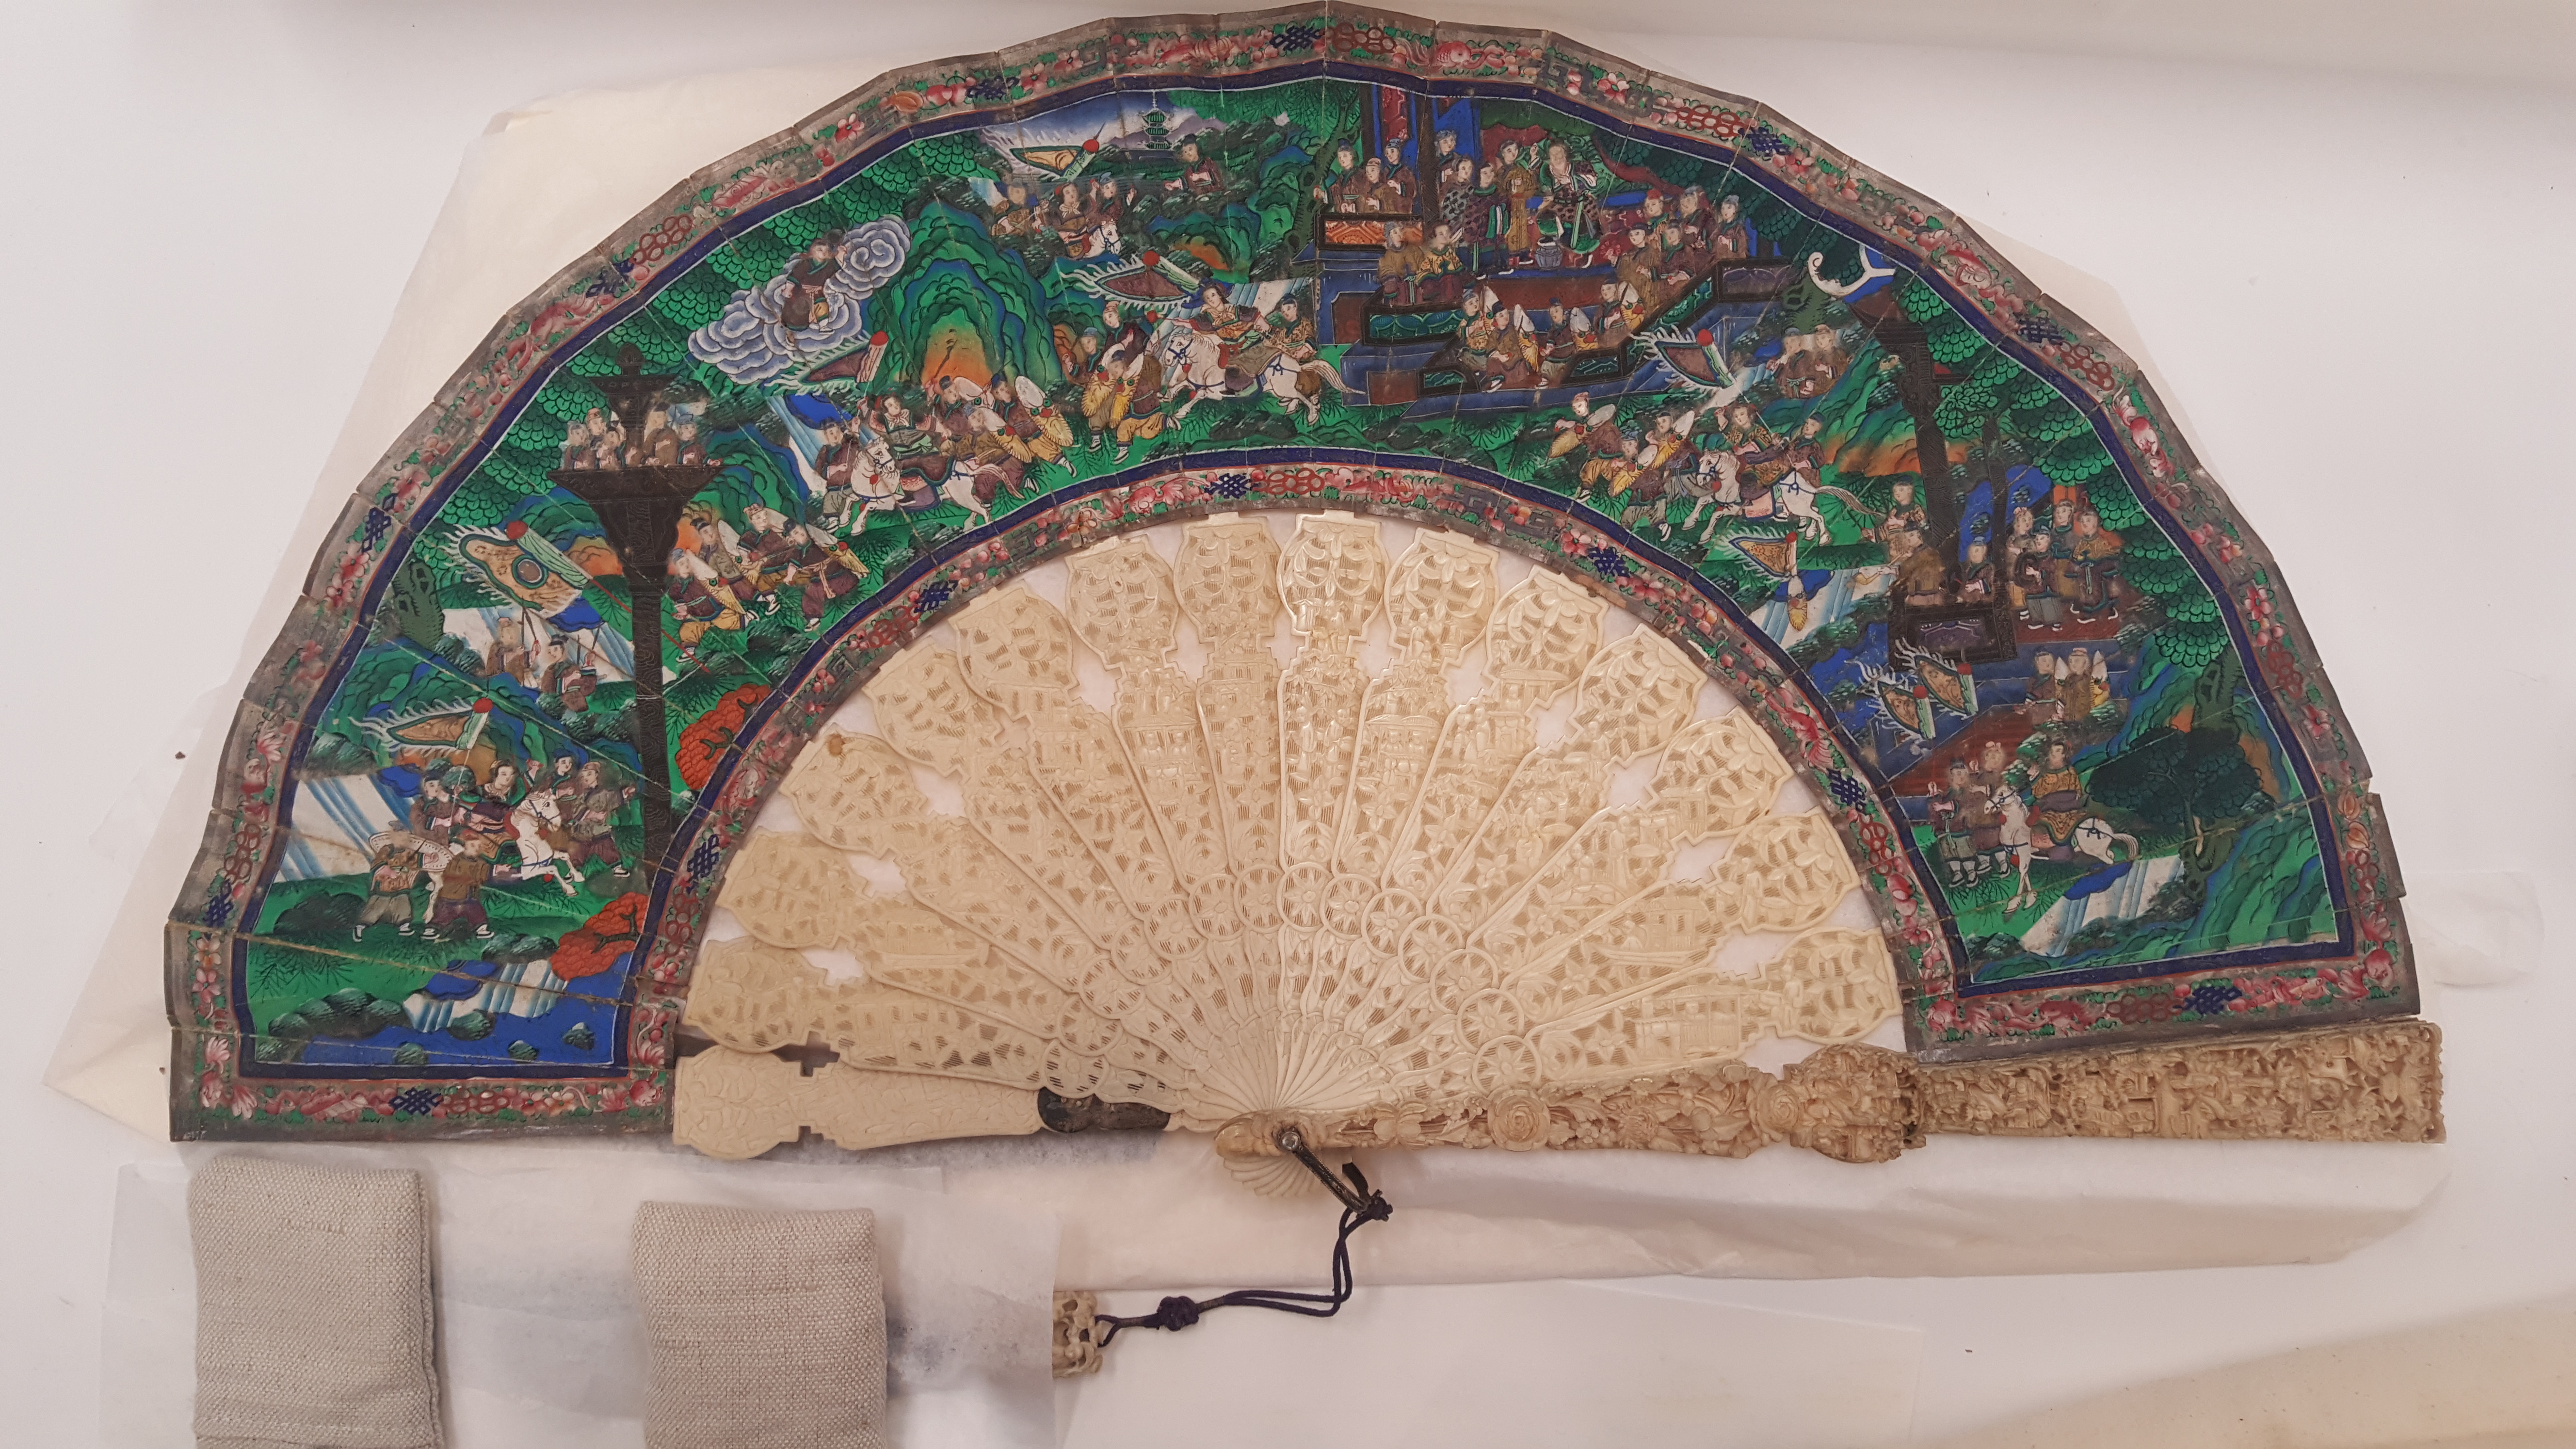 19th Century Chinese fan open during treatment of the ivory blades. The ivory blades on the left half (before treatment) appear dark and dull, while those on the right (after cleaning) are bright and glossy.